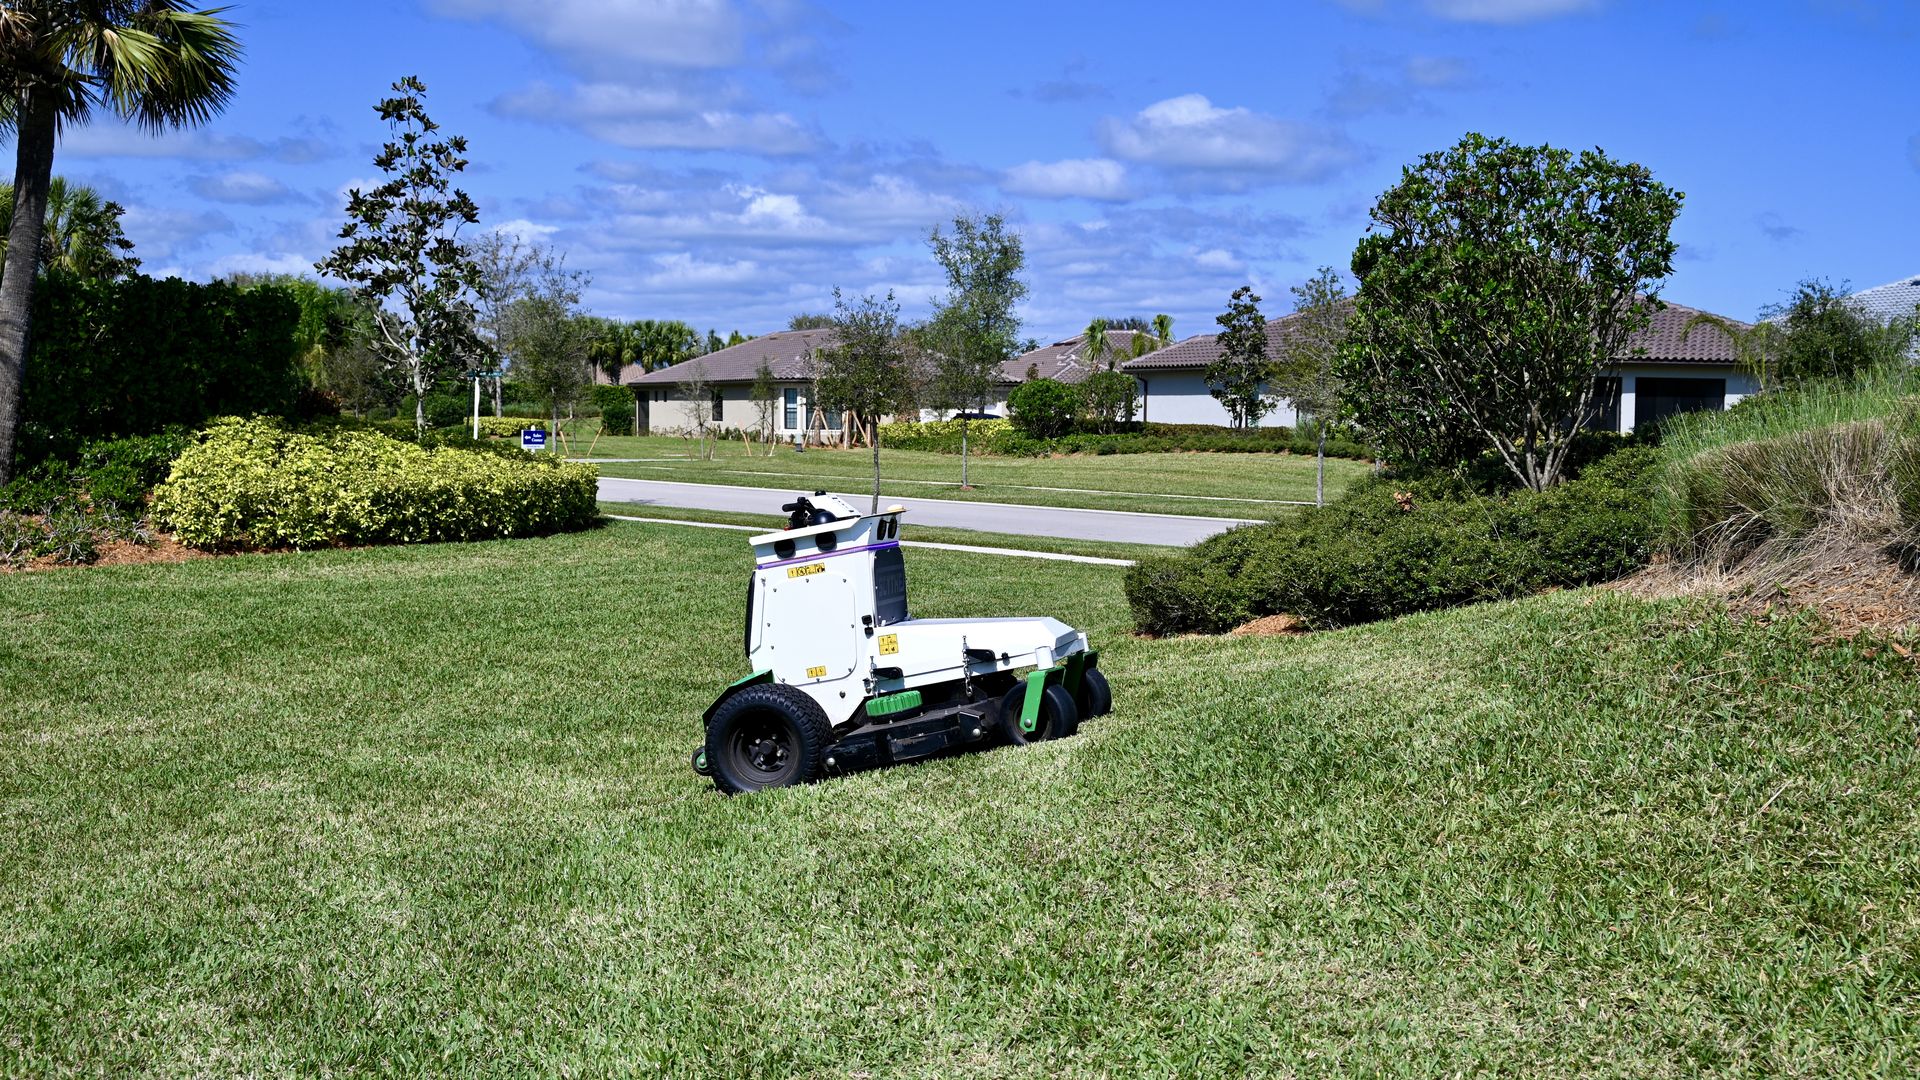 An automated robot lawnmower.